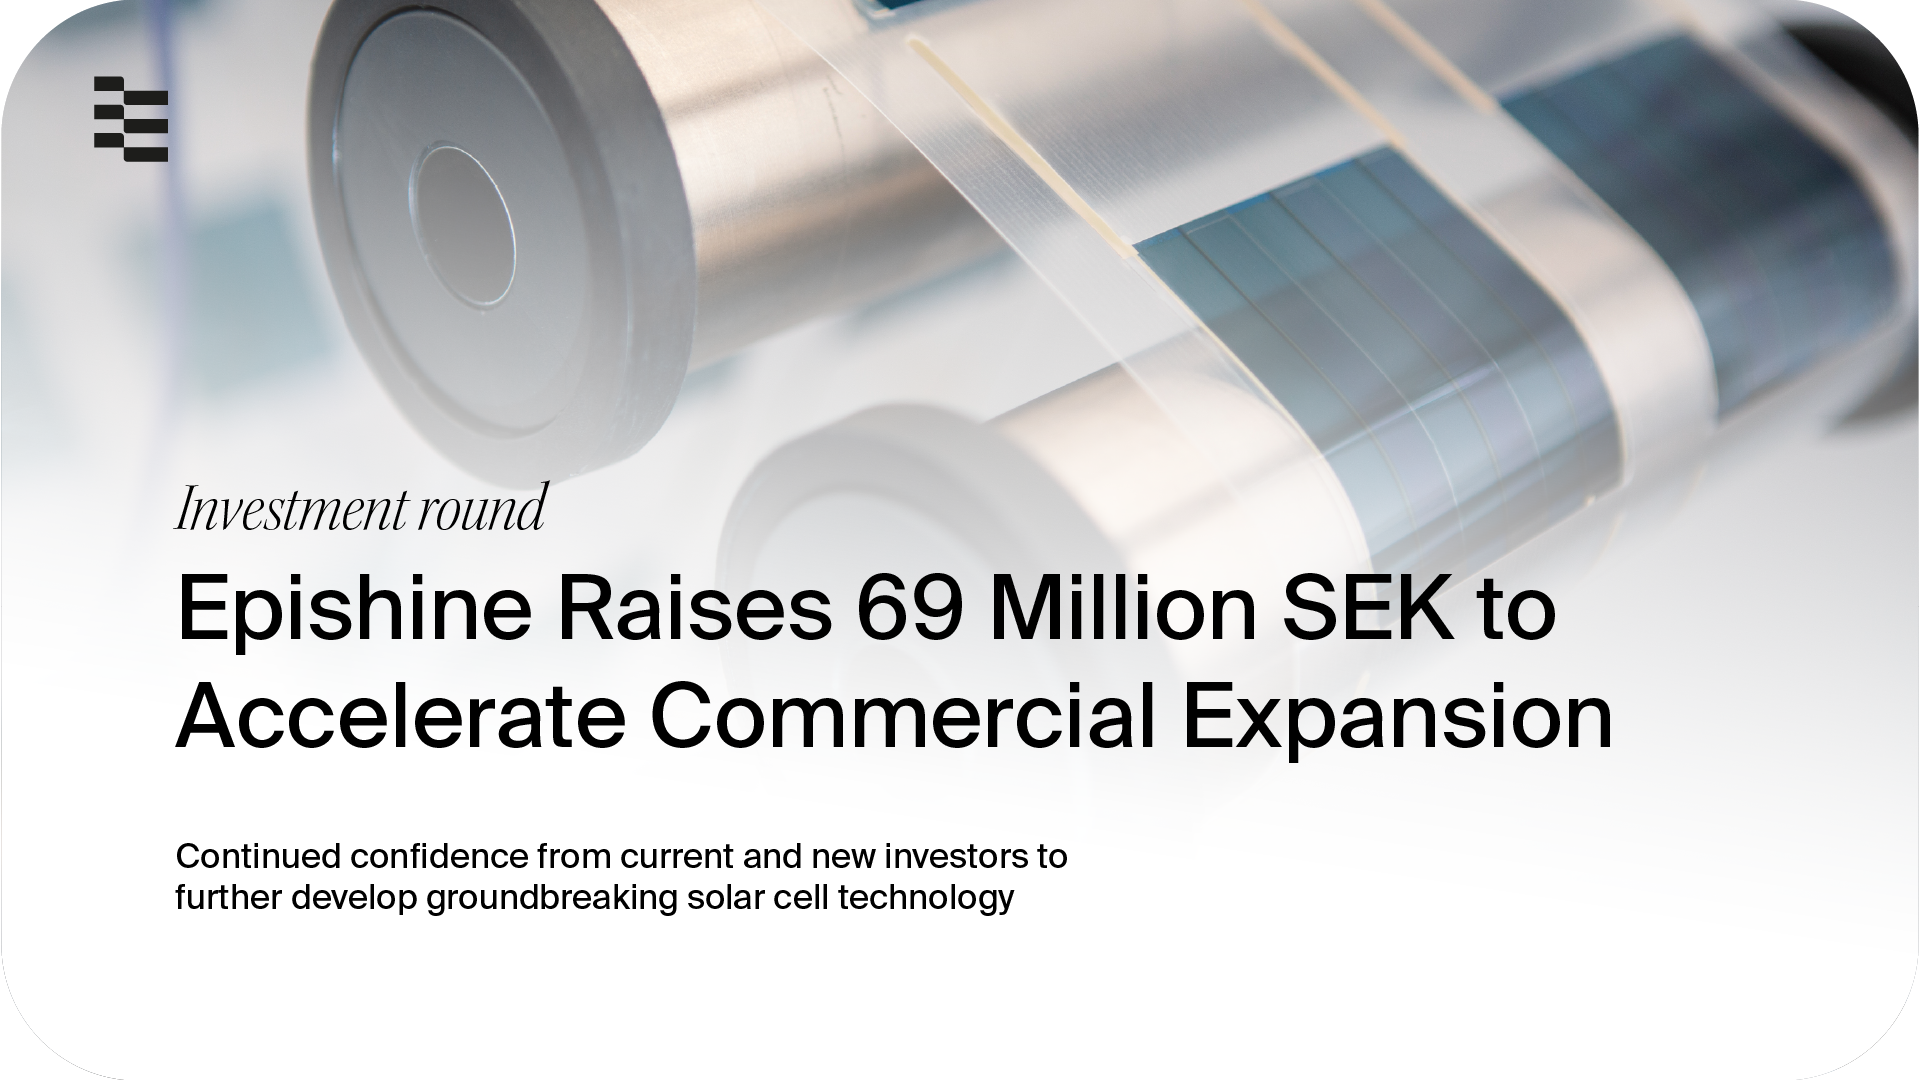 Epishine Raises SEK 69 million to Accelerate Commercial Expansion in Groundbreaking Solar Cell Technology